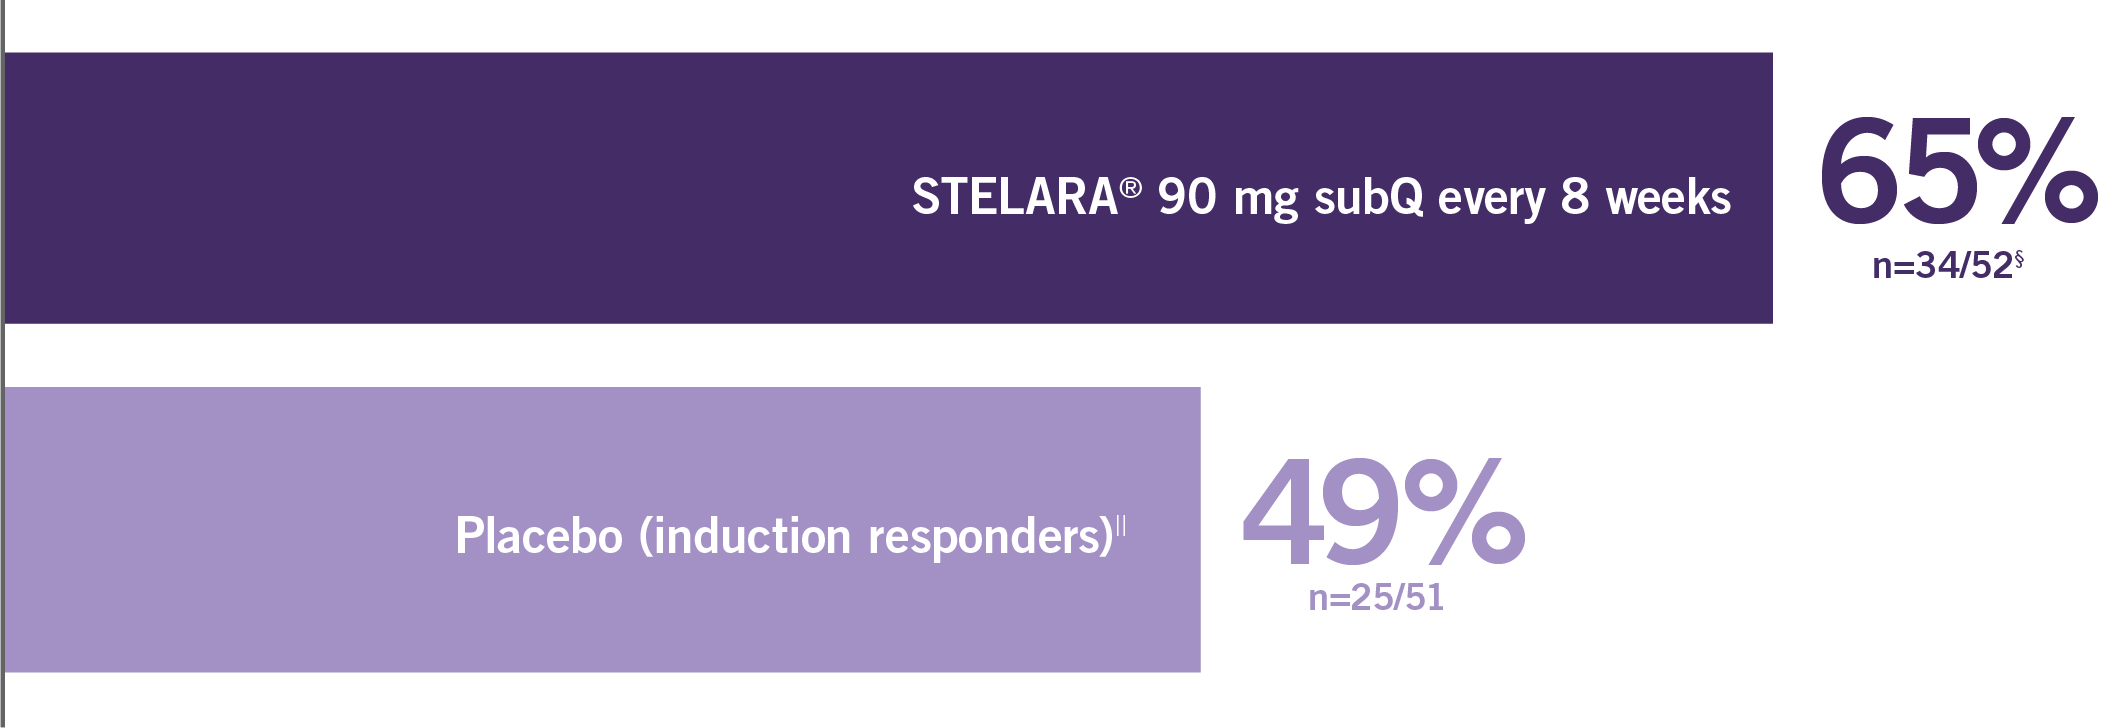 Other endpoint data of clinical remission in TNF Blocker–naïve Subgroup at 1 year after induction between patients taking STELARA® and placebo